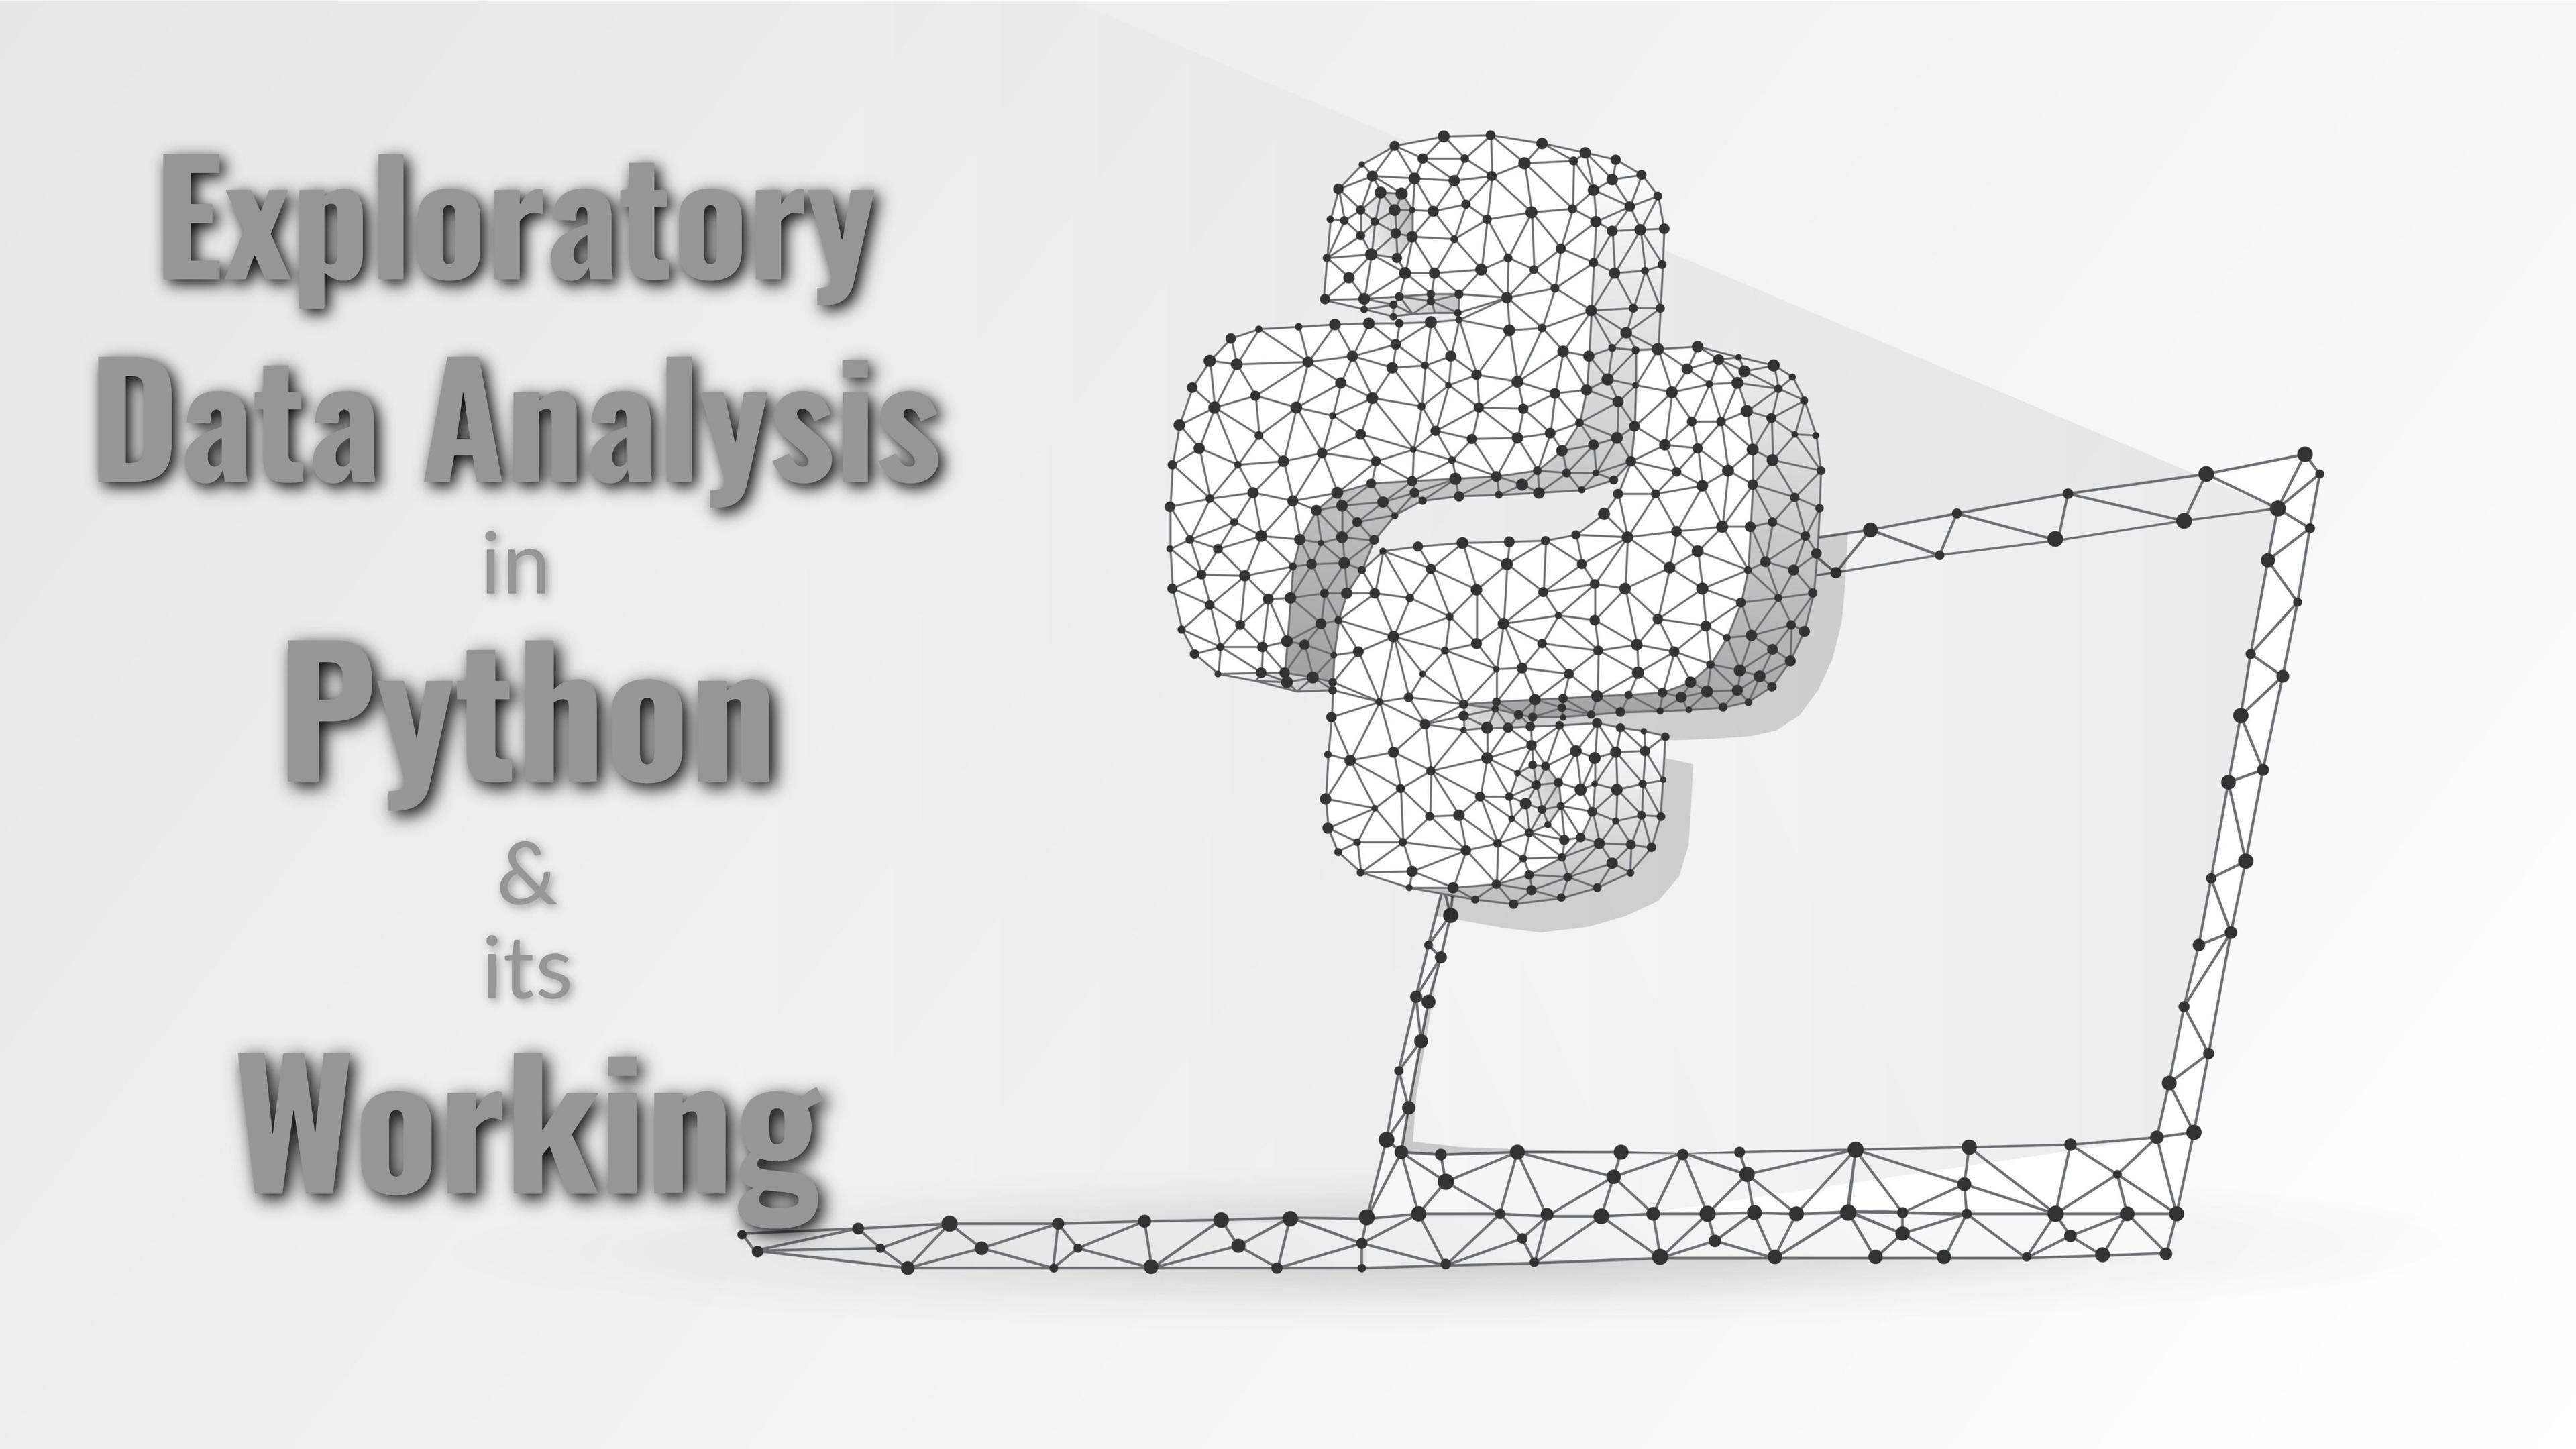 Exploratory Data Analysis in Python and its working.